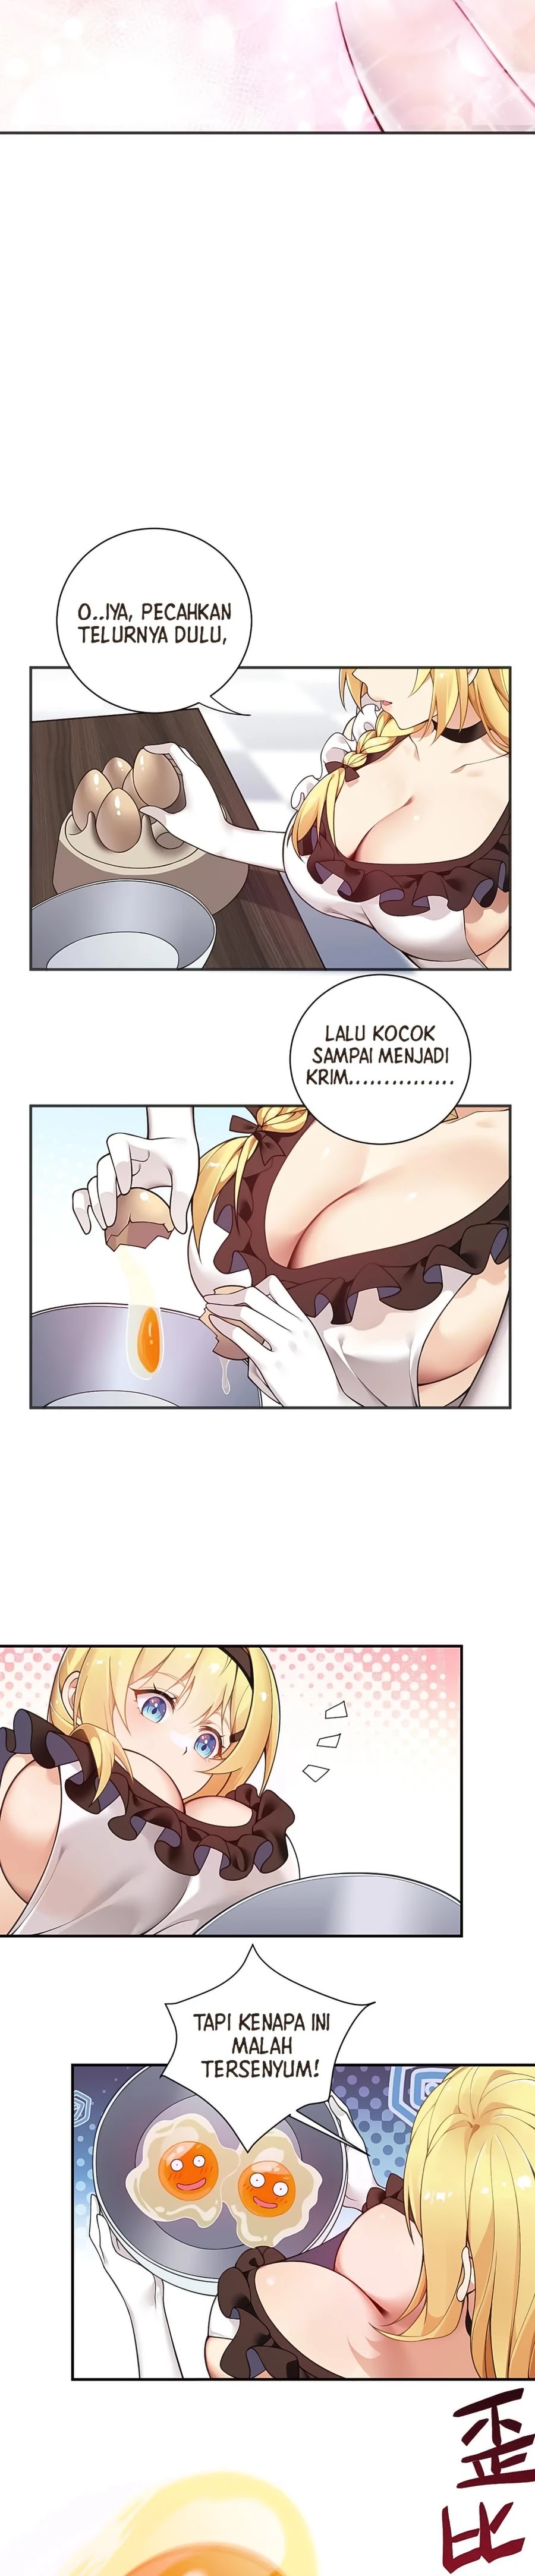 Holy Maiden, Please Stop You Weird Thought In Your Brain! Chapter 21-22.5